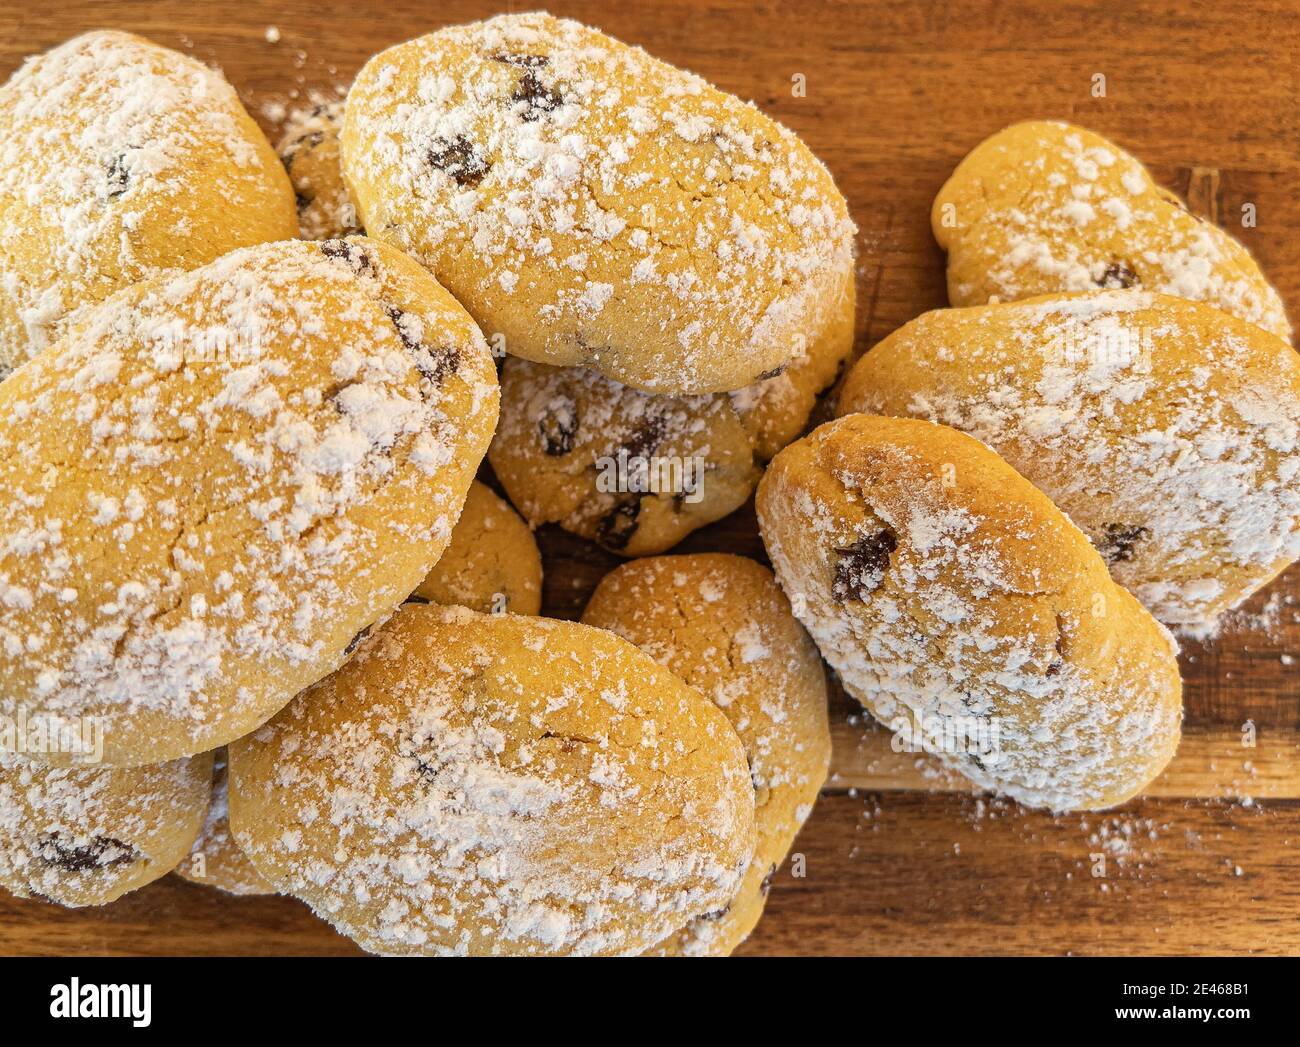 Close up of freshly baked homemade Zaletti - traditional venetian biscuits of cornflour and raisins Stock Photo